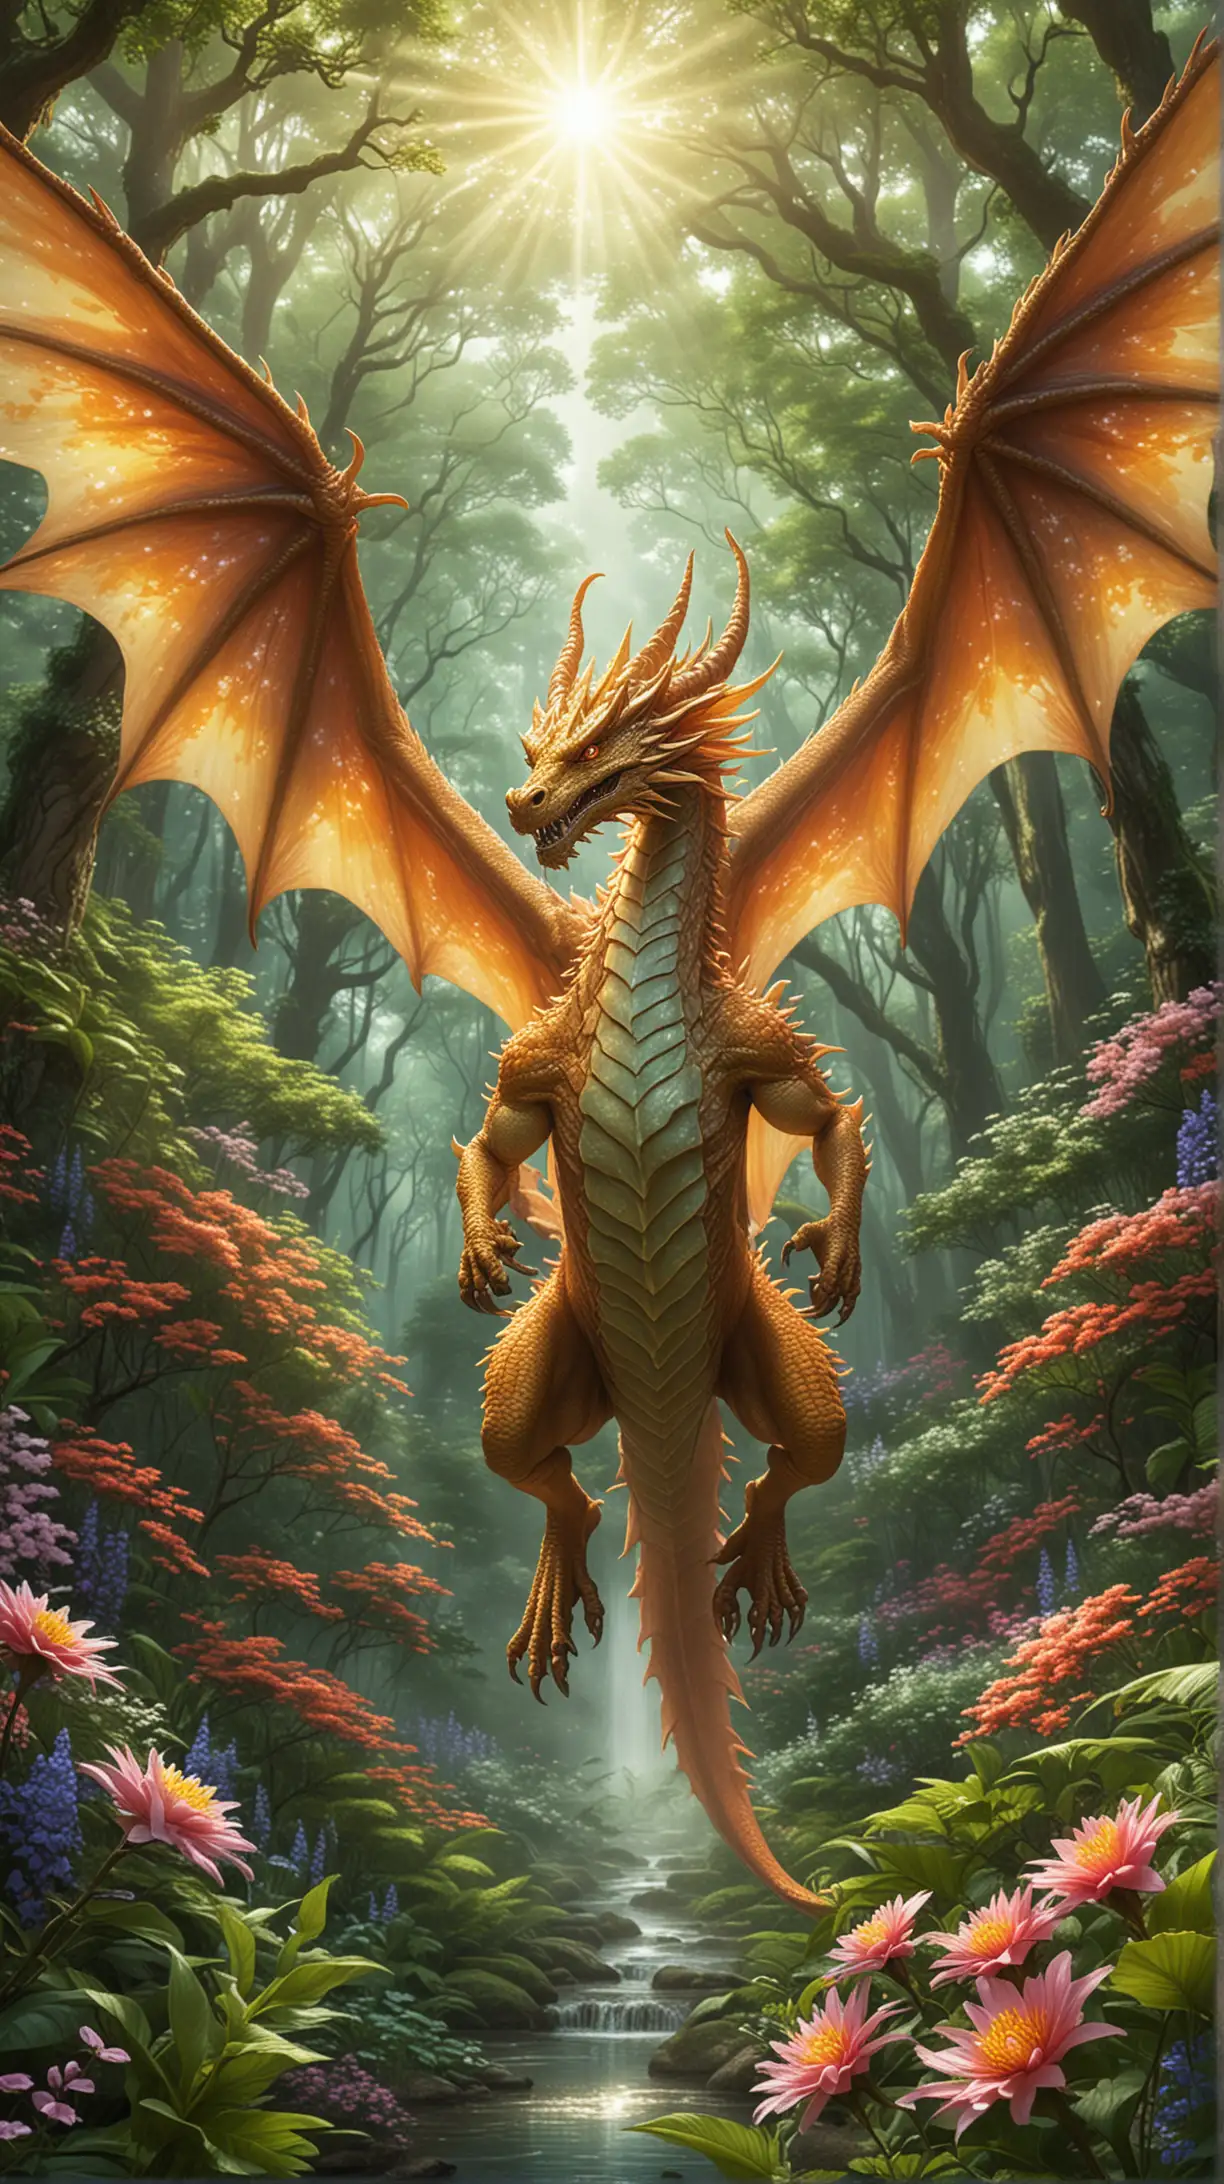 Radiant Healing Dragon Soaring Over Lush Forest